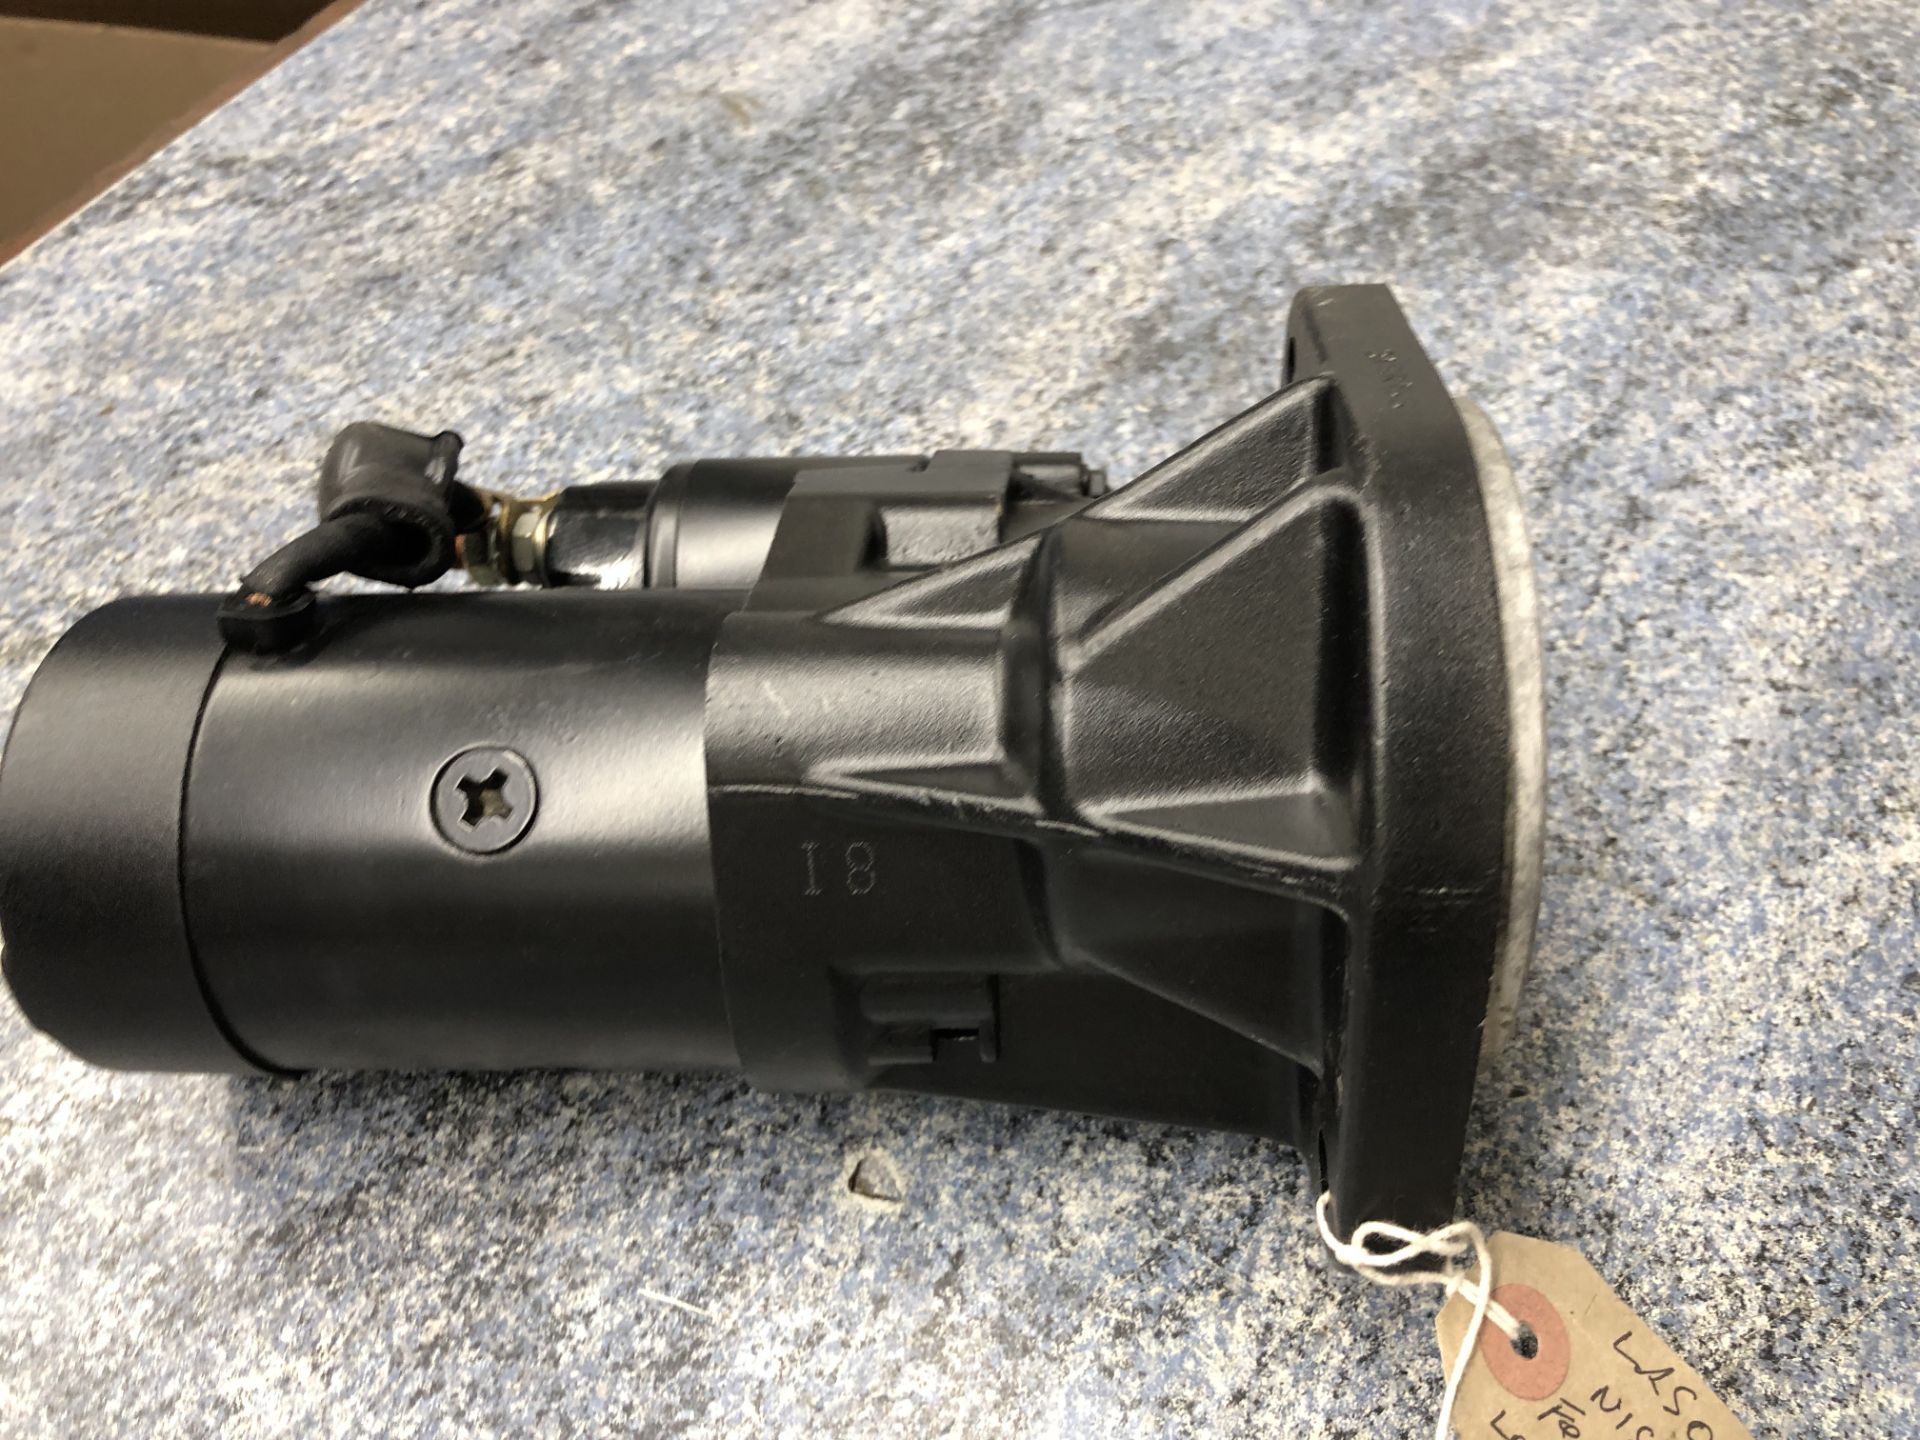 Make Unknown Starter Motor LRS01170- Collection By Appointment on Wednesday 12th June 2019) - Image 5 of 7